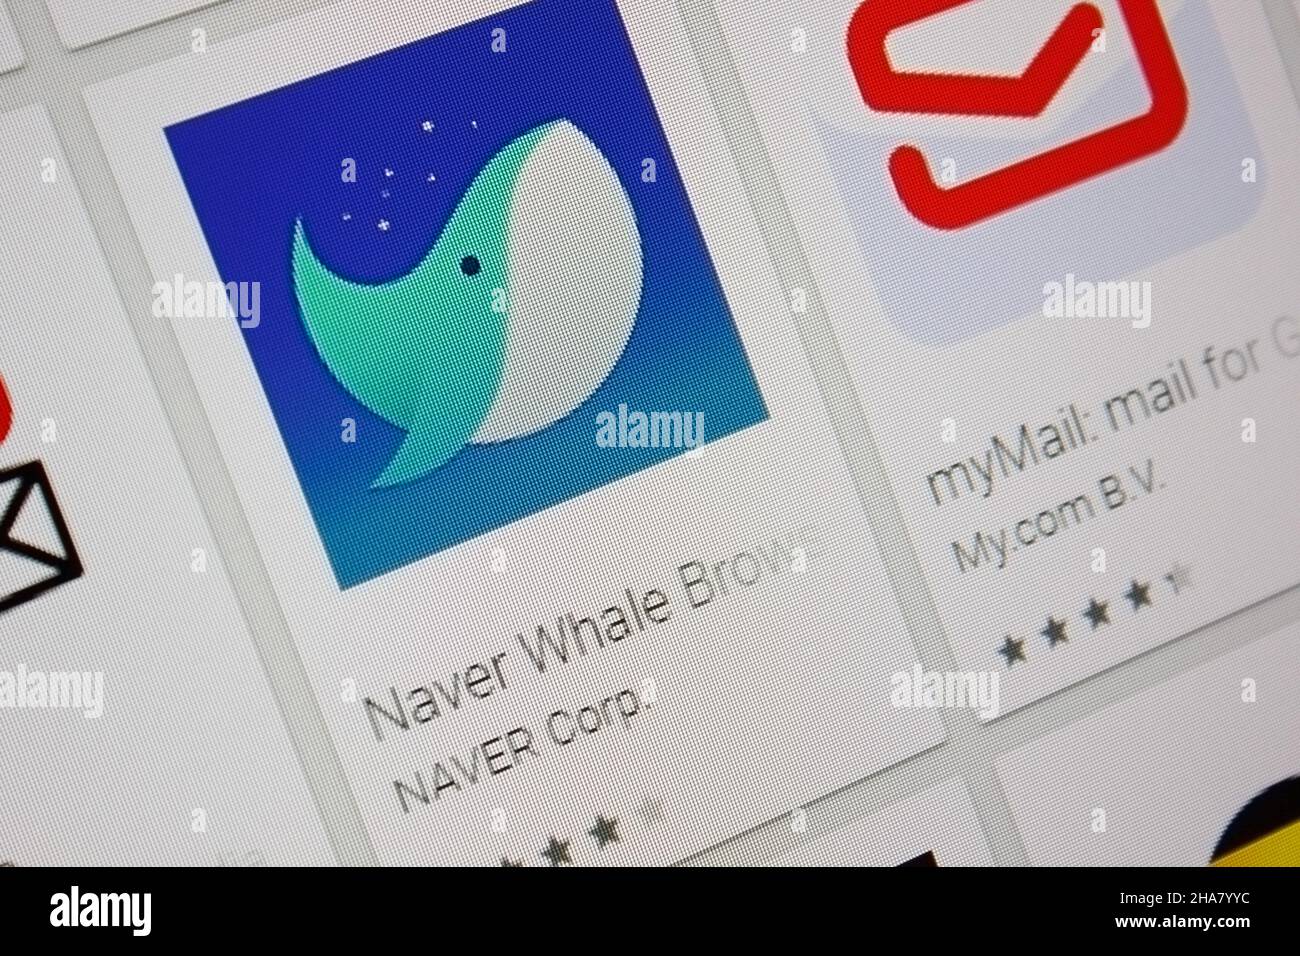 Ivanovsk, Russia - November 28, 2021: Naver Whale Browser app on the display of tablet PC. Stock Photo